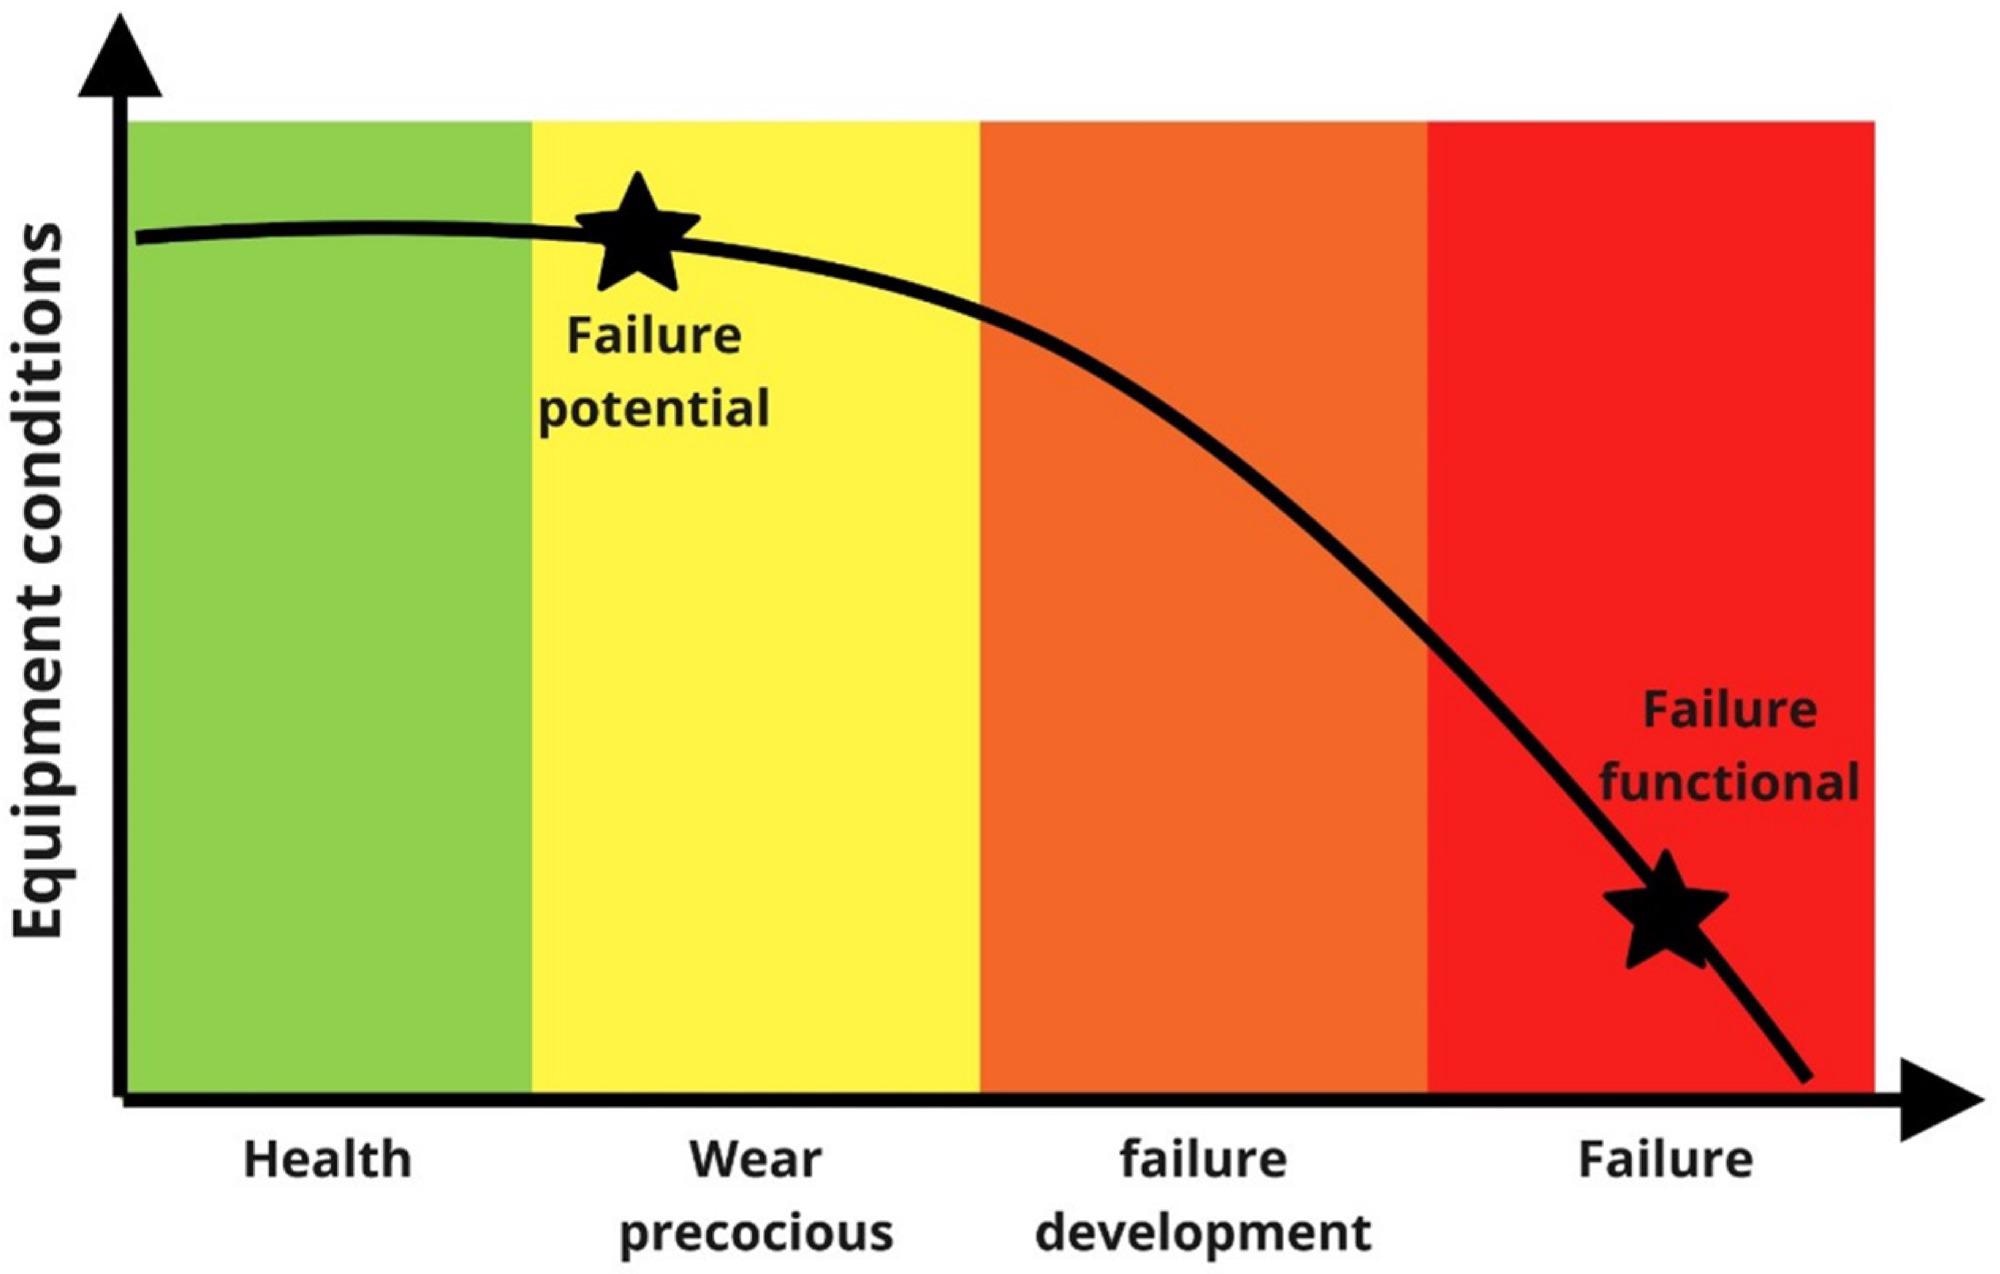 PF curve represents the condition of a component until functional failure. Source: Adapted from [52].